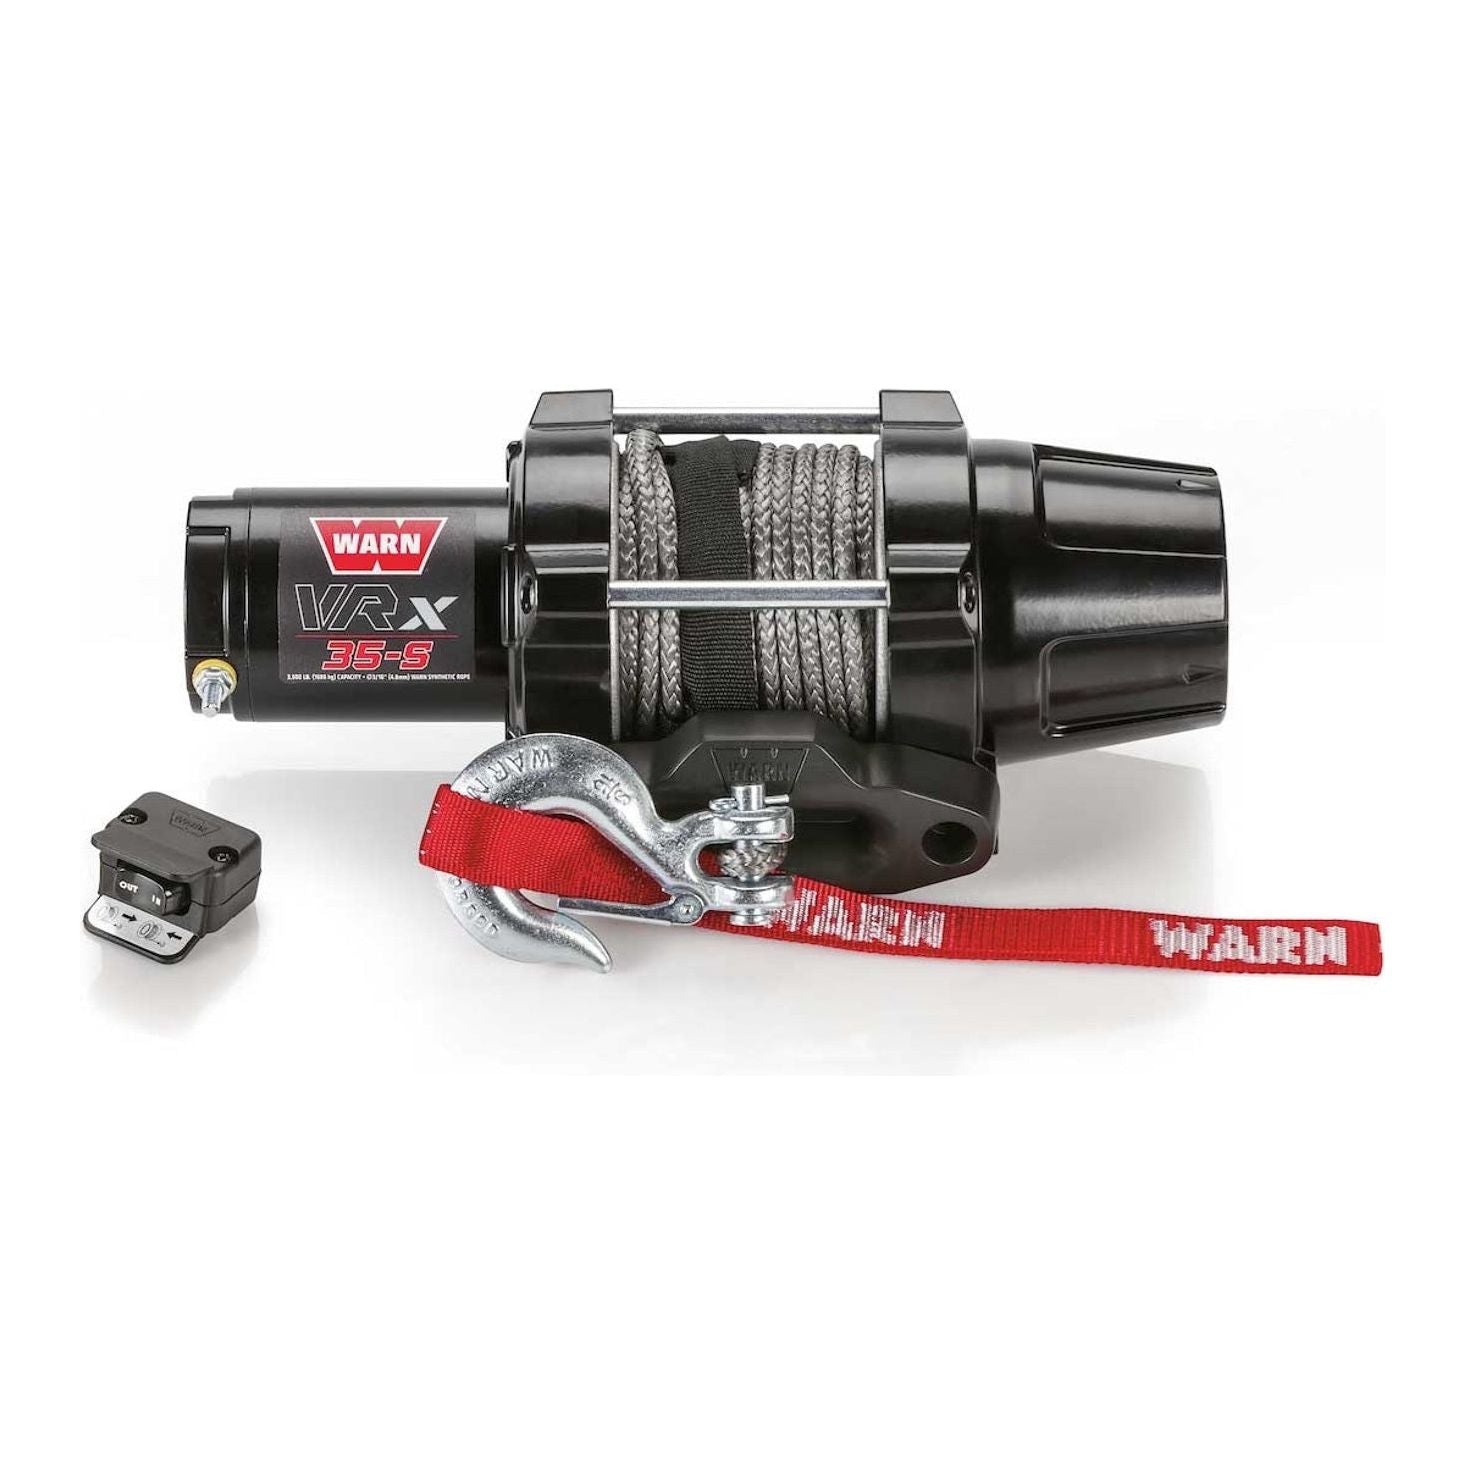 WARN 101030 - VRX 35-S Winch 3500lb Synthetic Rope